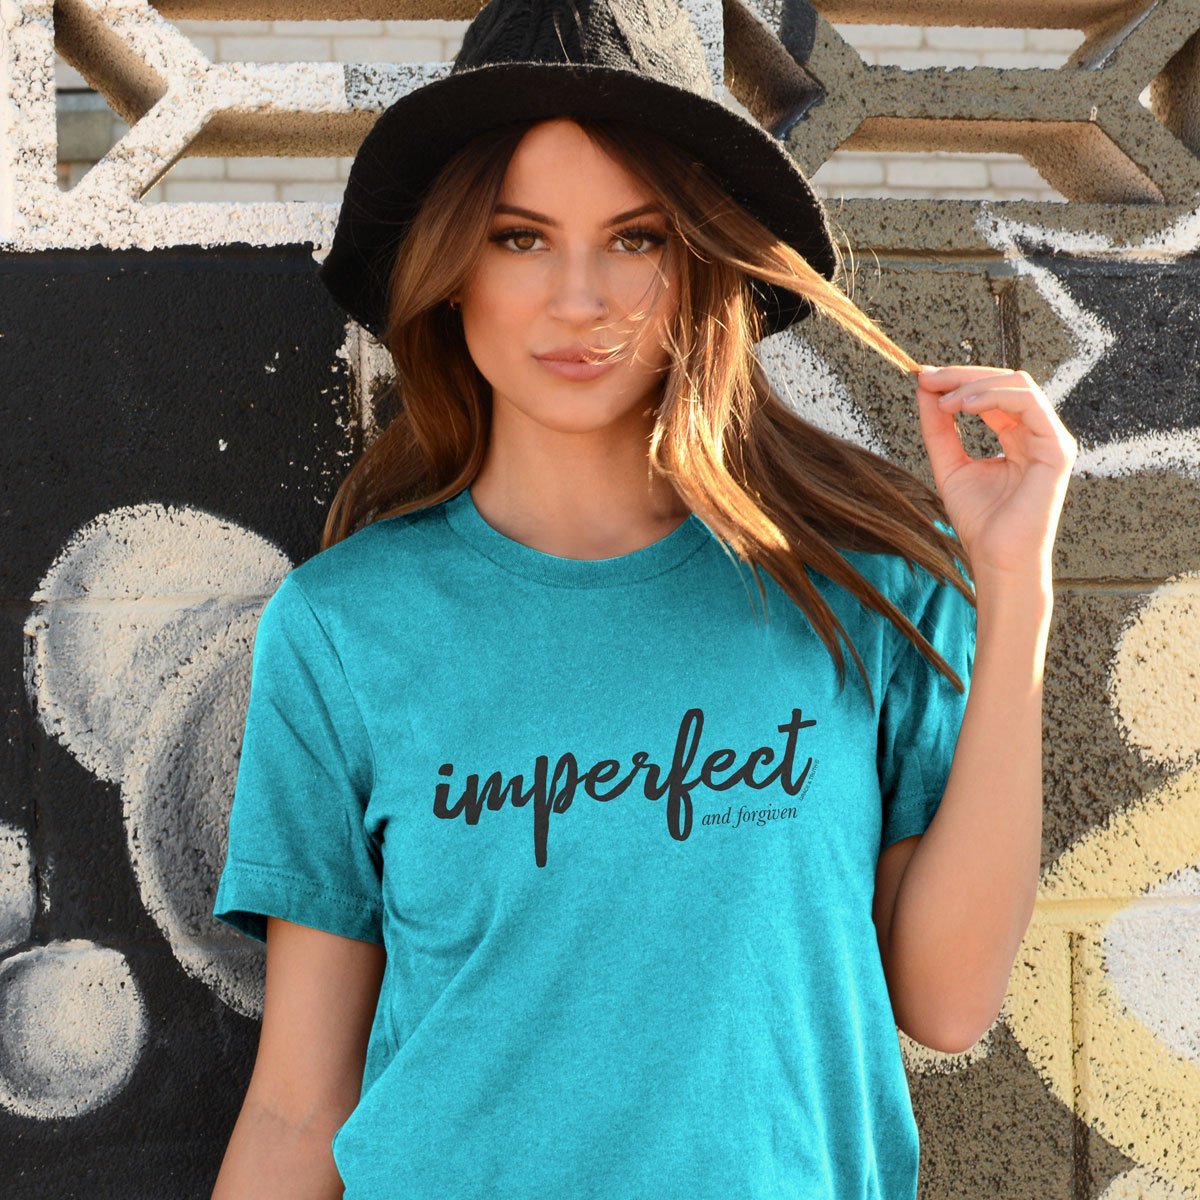 Cherished Girl Grace & Truth Imperfect and Forgiven Girlie Christian Bright T Shirt